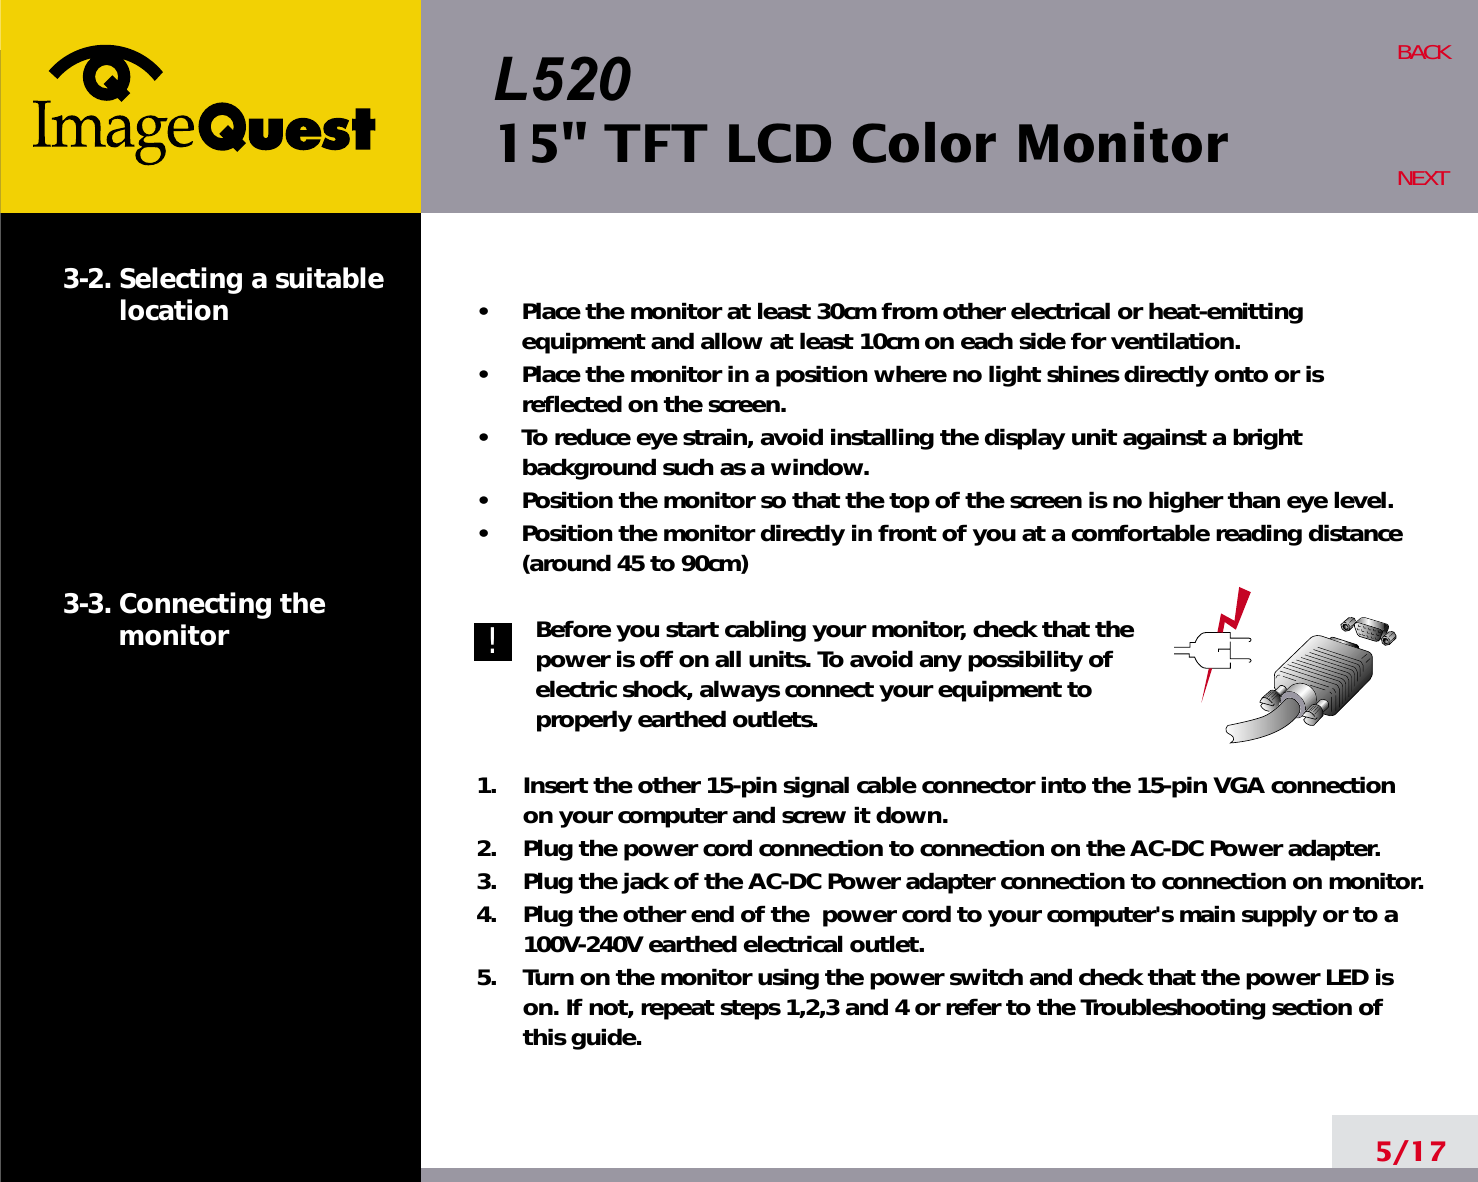 L52015&quot; TFT LCD Color Monitor5/17BACKNEXT3-2. Selecting a suitablelocation3-3. Connecting the monitor•     Place the monitor at least 30cm from other electrical or heat-emittingequipment and allow at least 10cm on each side for ventilation.•     Place the monitor in a position where no light shines directly onto or isreflected on the screen.•     To reduce eye strain, avoid installing the display unit against a brightbackground such as a window.•     Position the monitor so that the top of the screen is no higher than eye level.•     Position the monitor directly in front of you at a comfortable reading distance(around 45 to 90cm) Before you start cabling your monitor, check that thepower is off on all units. To avoid any possibility ofelectric shock, always connect your equipment toproperly earthed outlets.1.    Insert the other 15-pin signal cable connector into the 15-pin VGA connectionon your computer and screw it down. 2.    Plug the power cord connection to connection on the AC-DC Power adapter.3.    Plug the jack of the AC-DC Power adapter connection to connection on monitor.4.    Plug the other end of the  power cord to your computer&apos;s main supply or to a100V-240V earthed electrical outlet.5.    Turn on the monitor using the power switch and check that the power LED ison. If not, repeat steps 1,2,3 and 4 or refer to the Troubleshooting section ofthis guide.!!